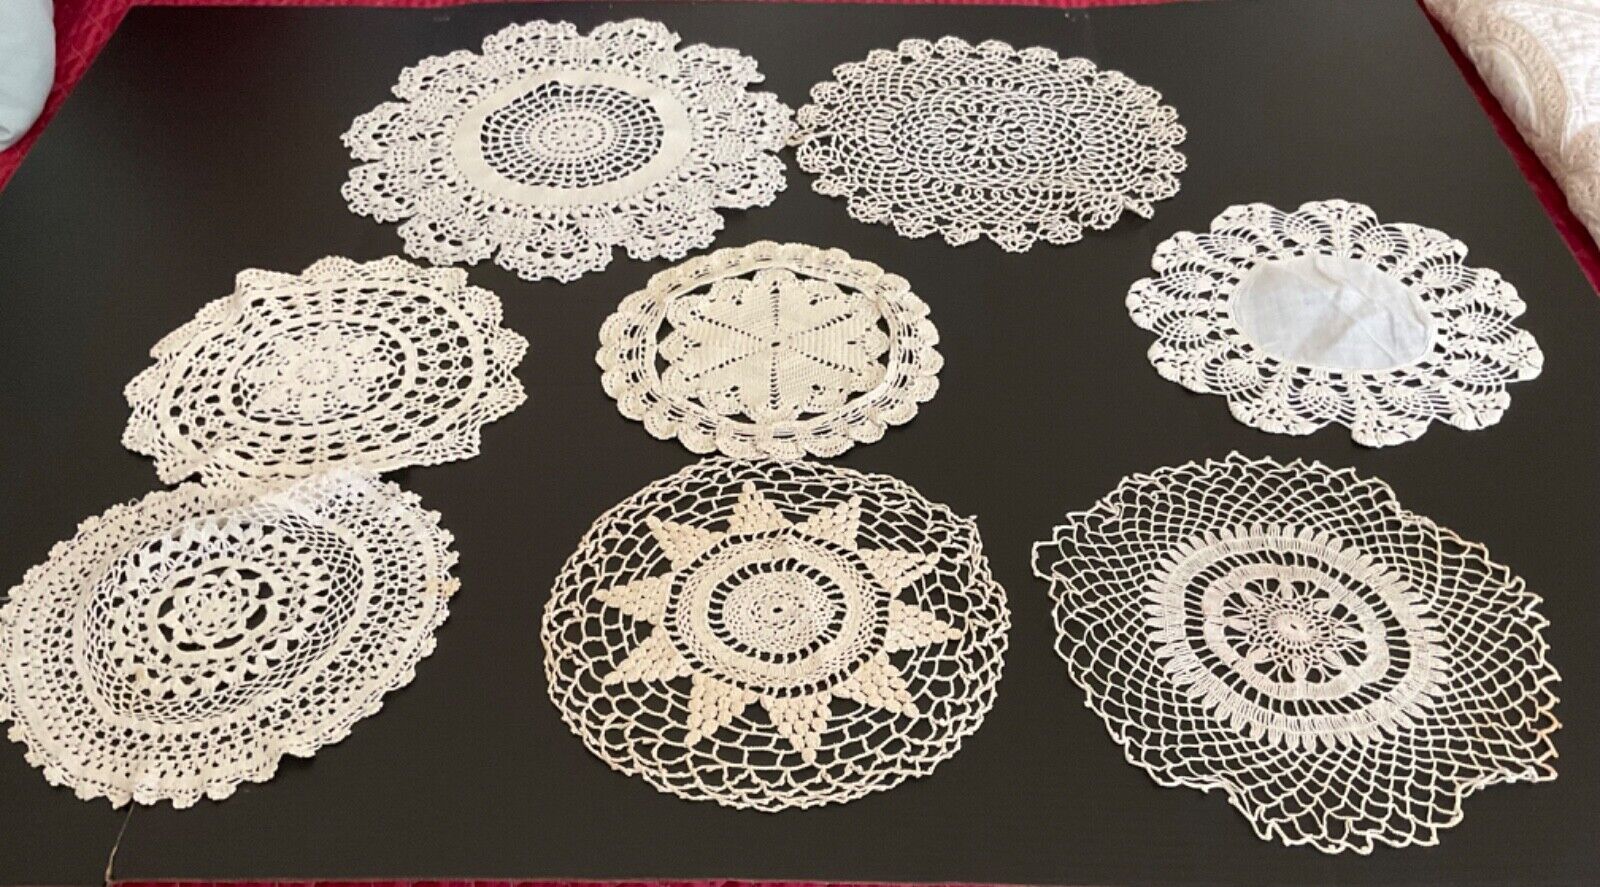 Estate Sale find. Lot of 8 white / off white Handcrafted Round Doilies.